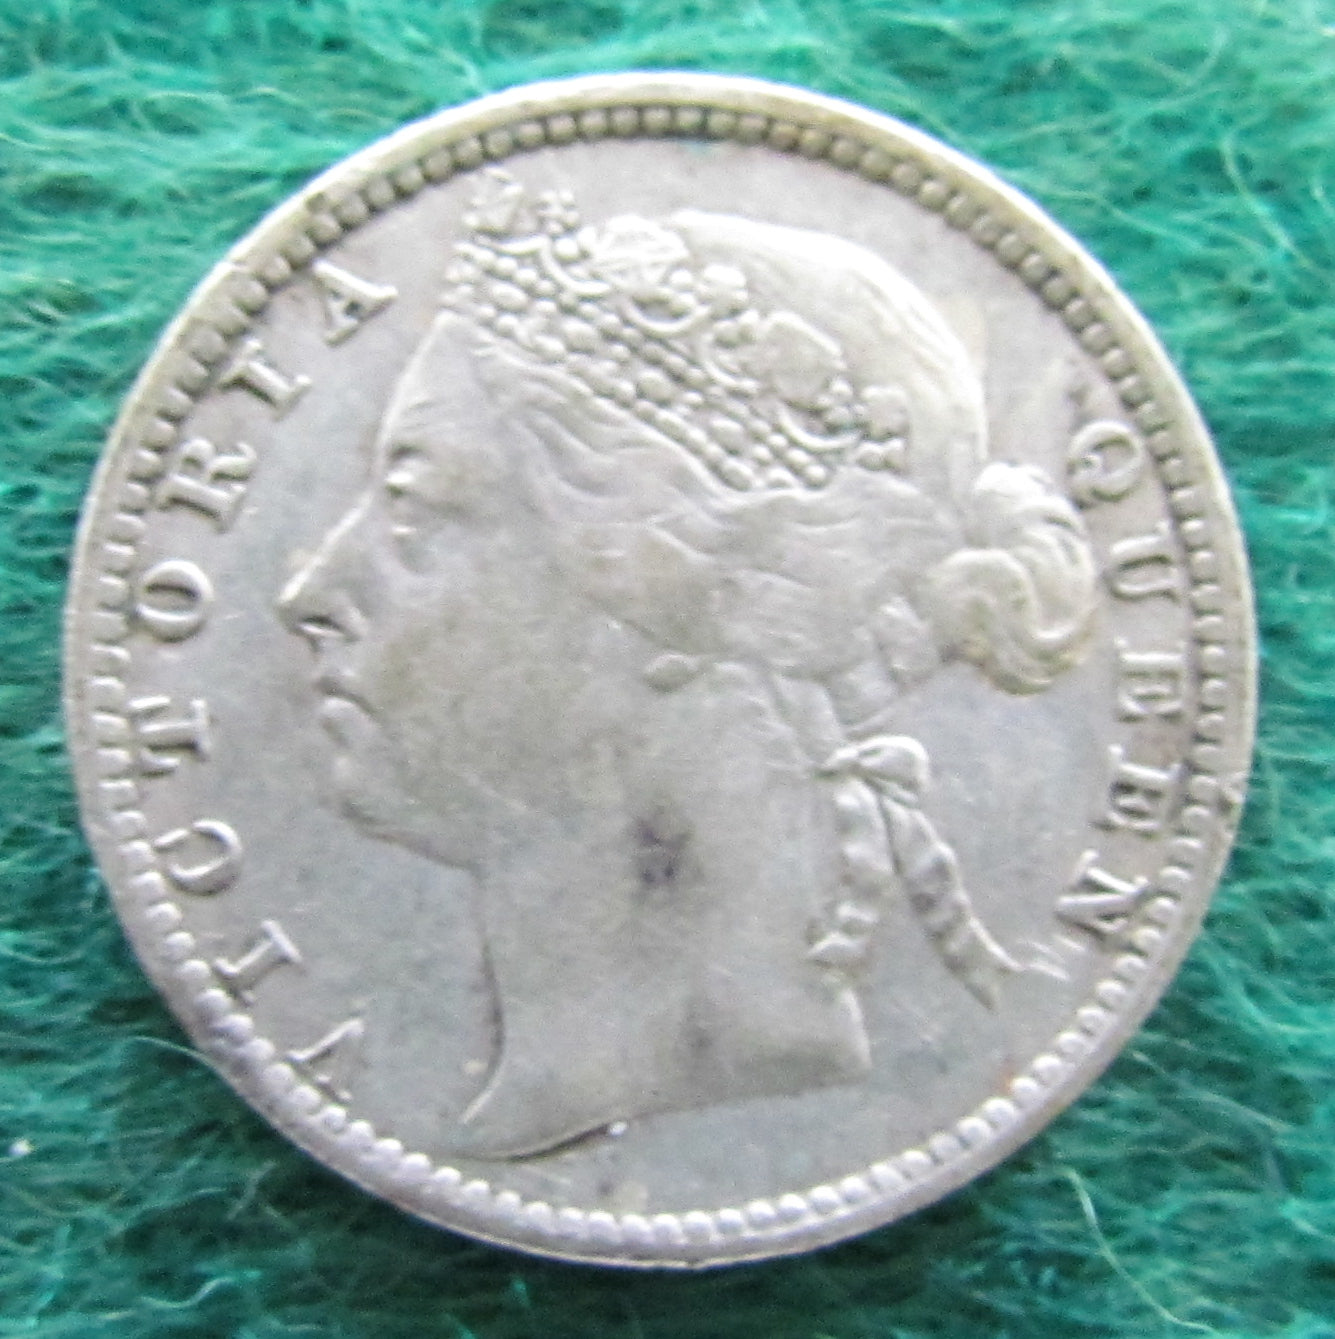 Straits Settlements 1898 10 Cent Queen Victoria Coin - Circulated